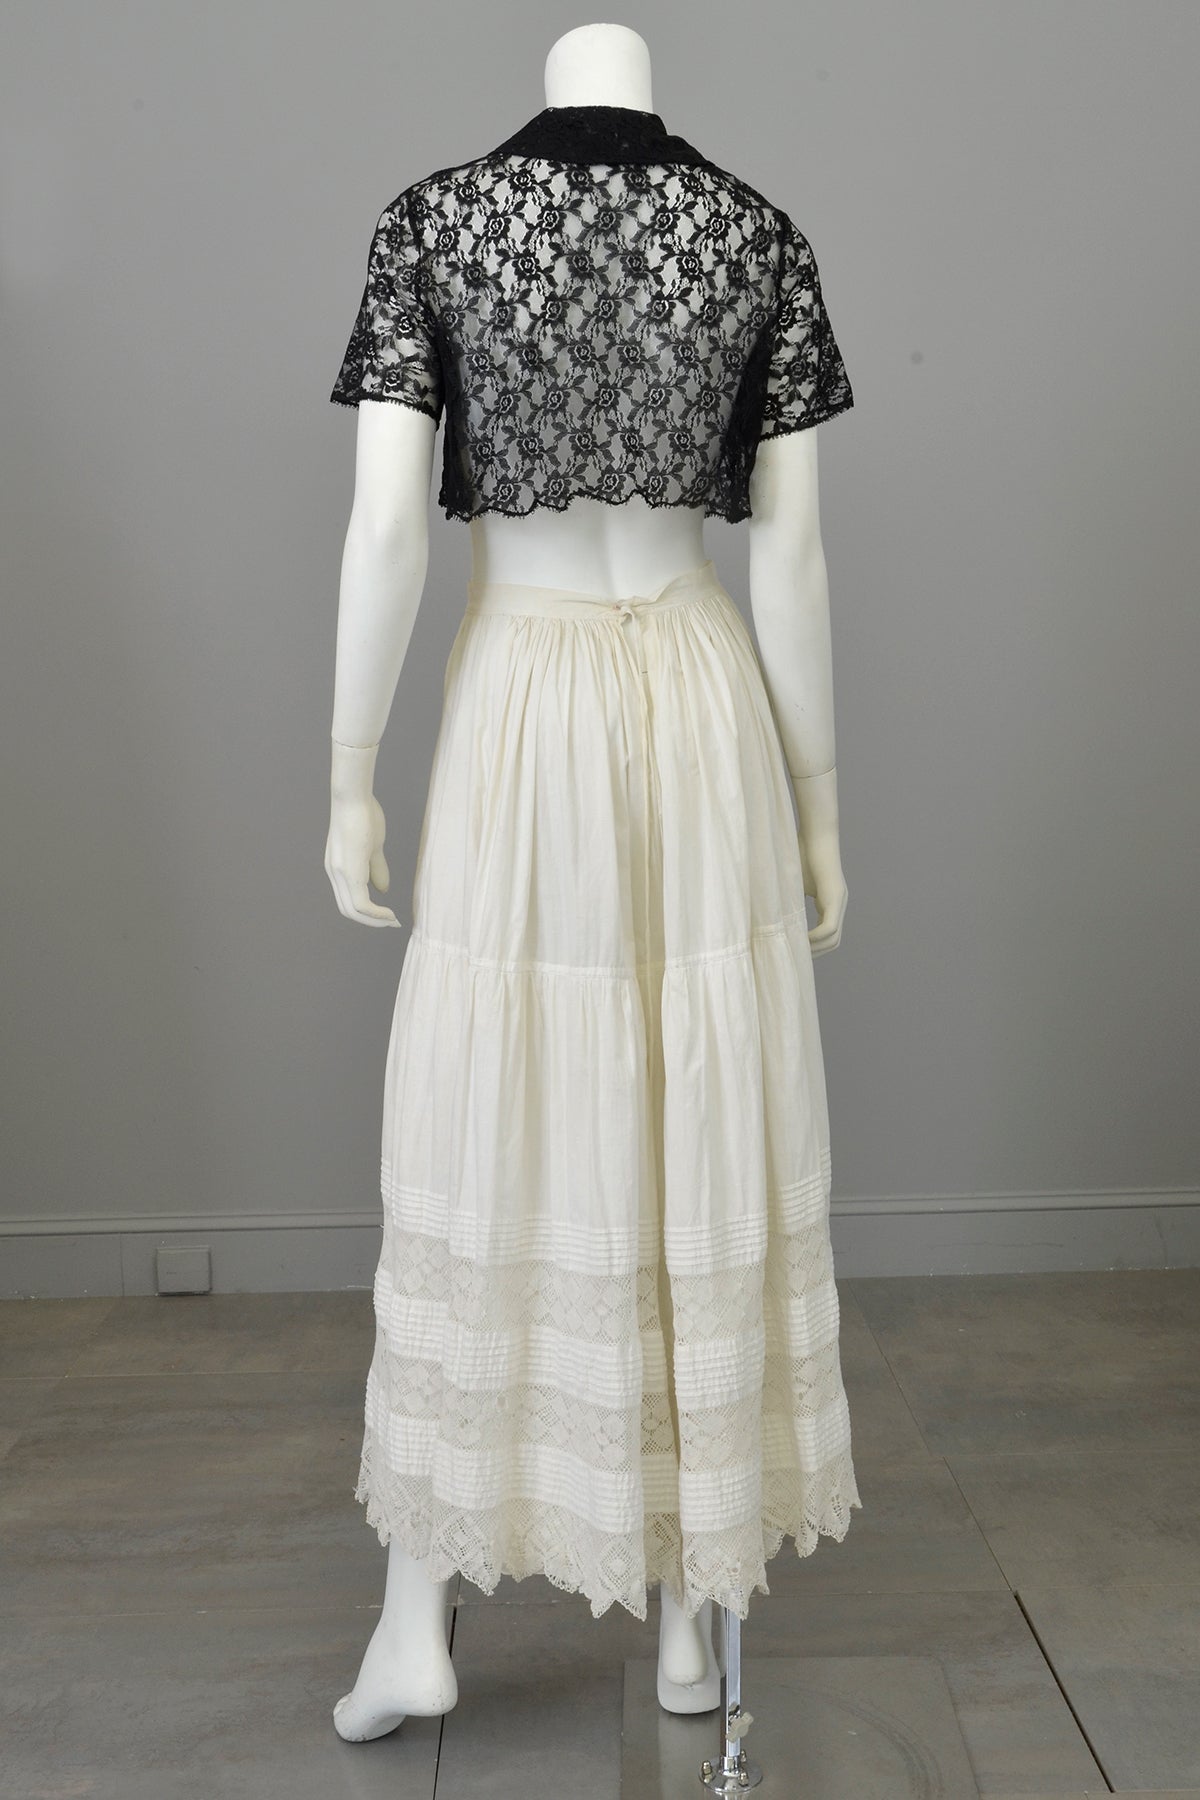 White Edwardian Petticoat Lawn Skirt with Tatted Lace Panels and Pintucking at Hem